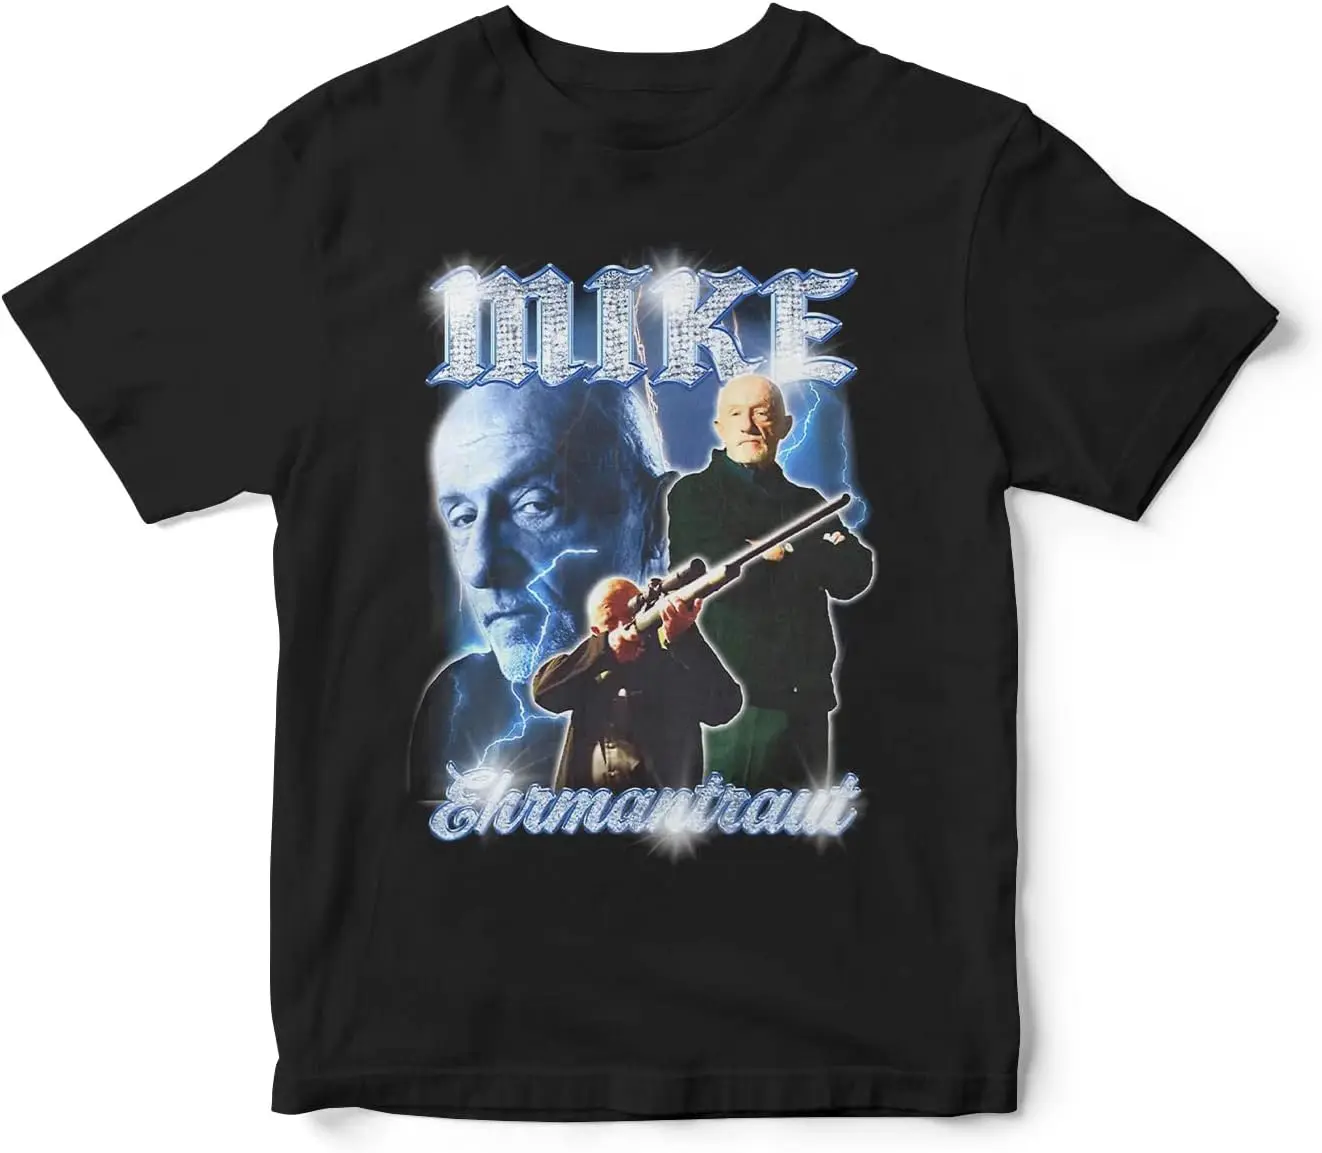 

Teenagers Youth Boys Girls Kids' Mike y Ehrmantraut Classic T-Shirt Short Sleeve Shirt Loose Tee X-Large